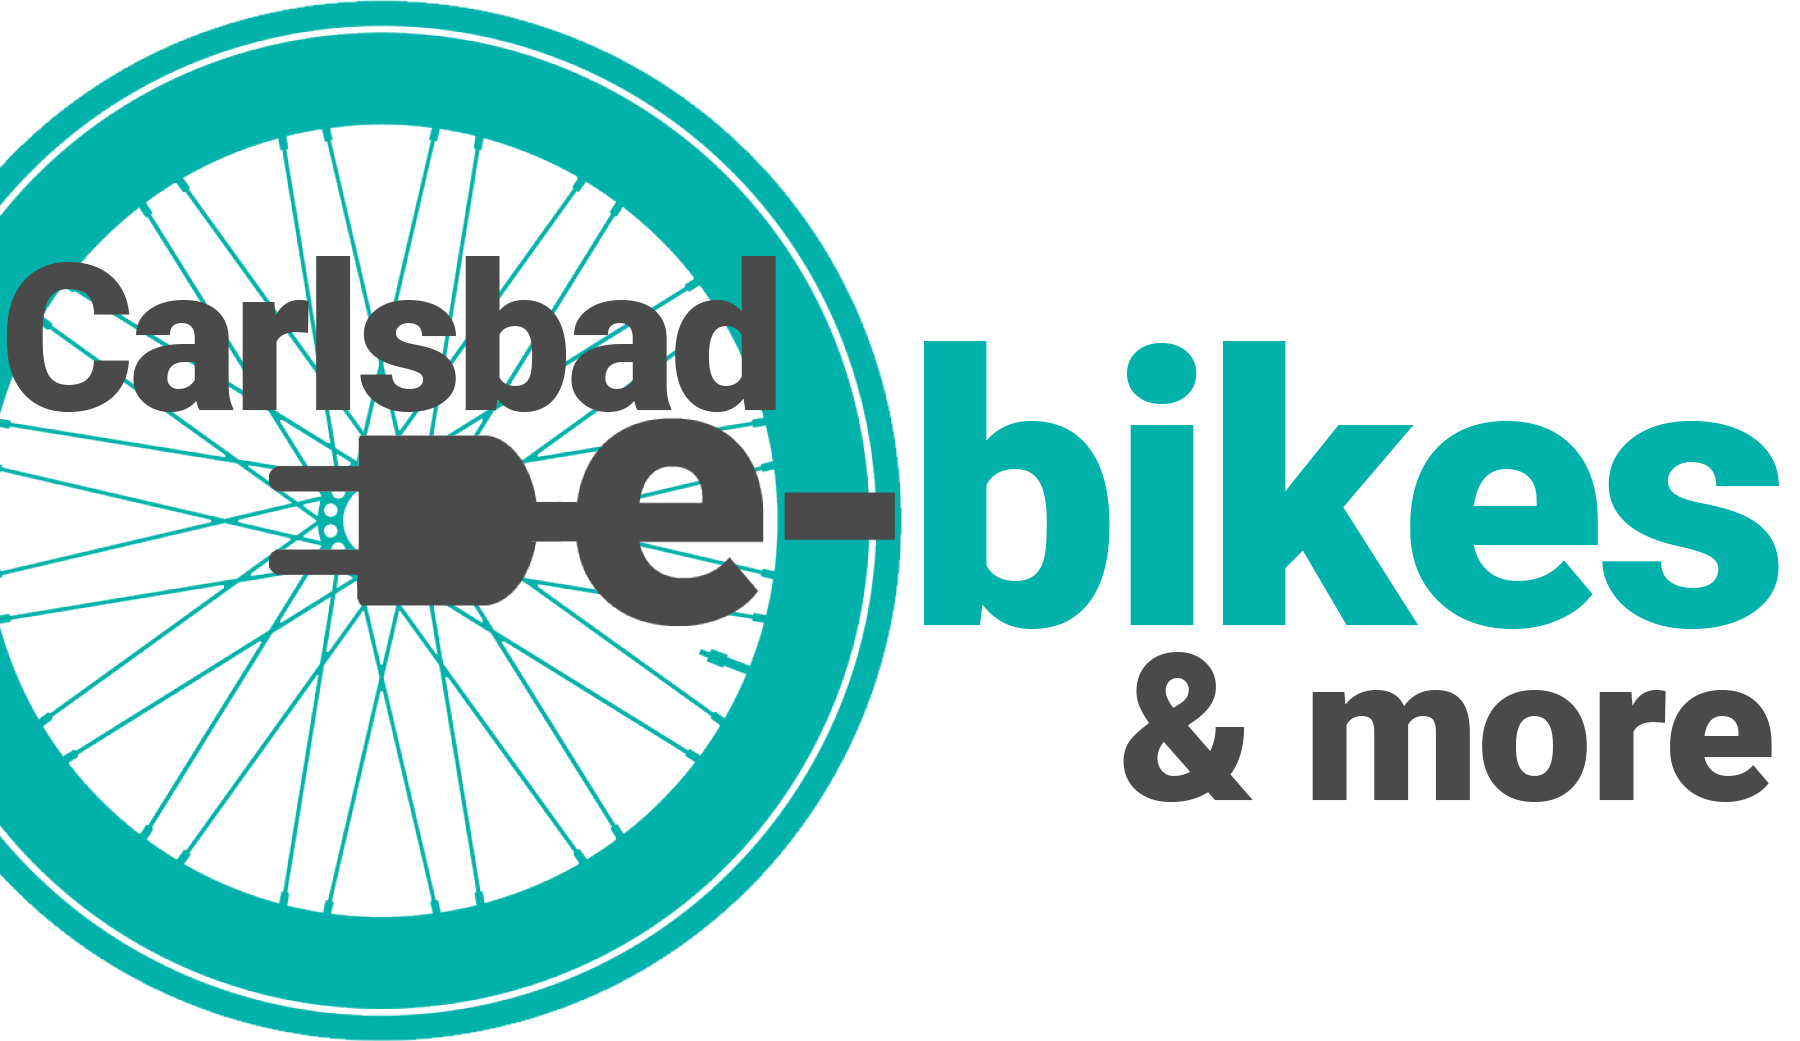 Carlsbad e-Bikes & More | The Best e-Bikes, Pedal Bikes, Golf Carts, and Accessories in Carlsbad CA